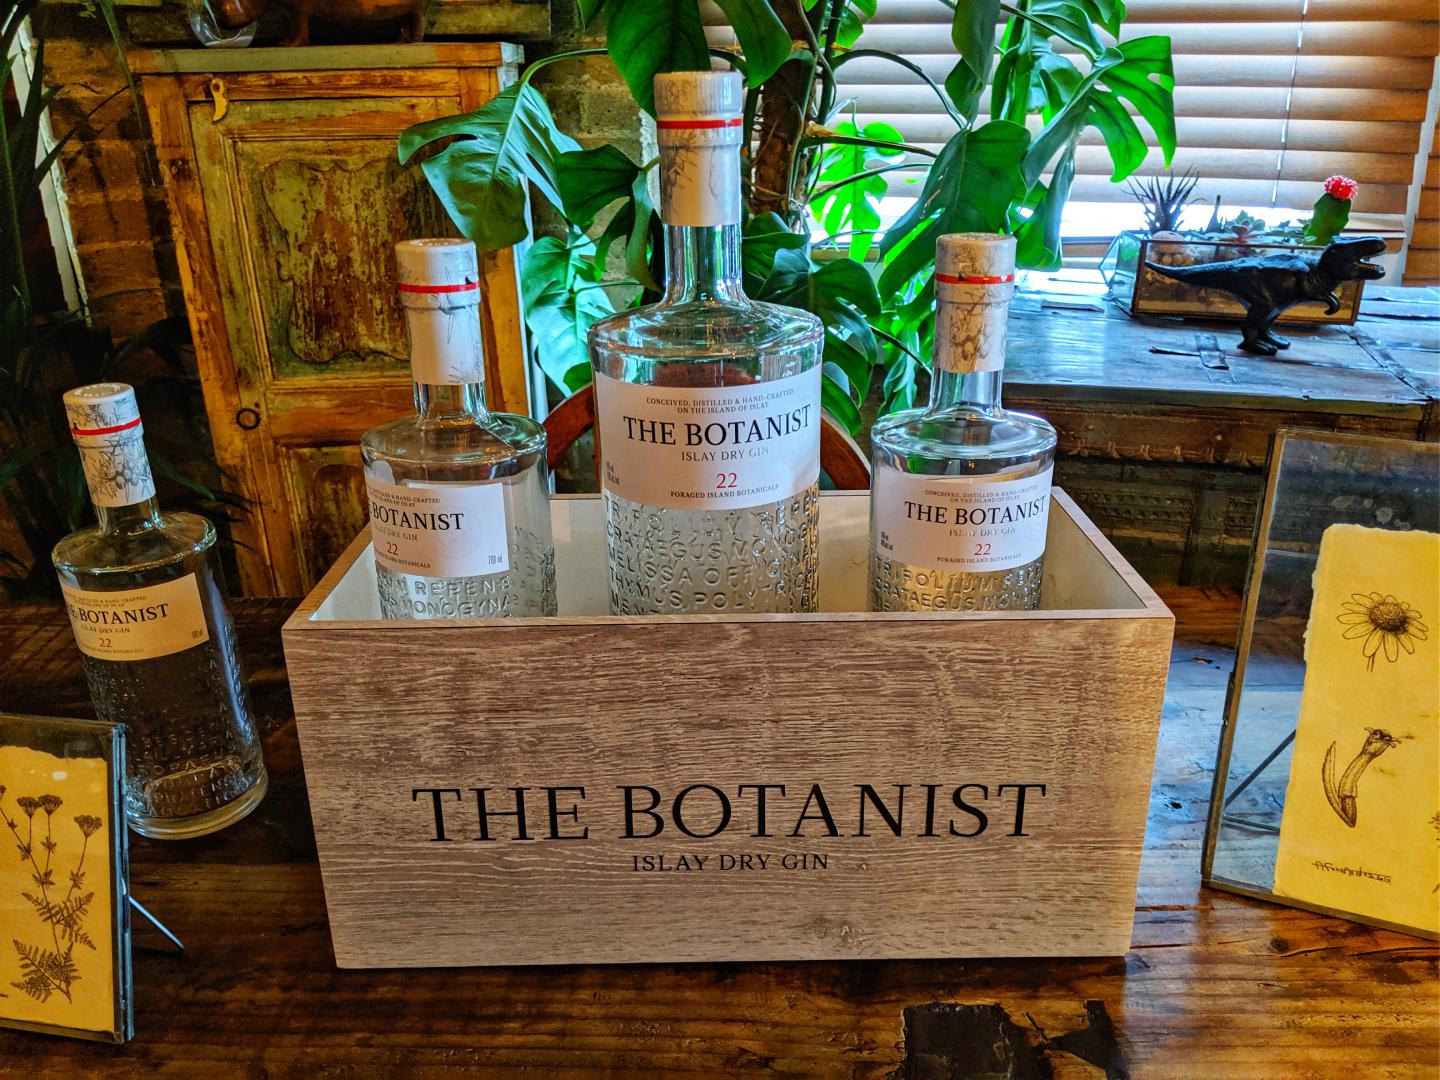 Botanist Gin shown on table in cocktail bar